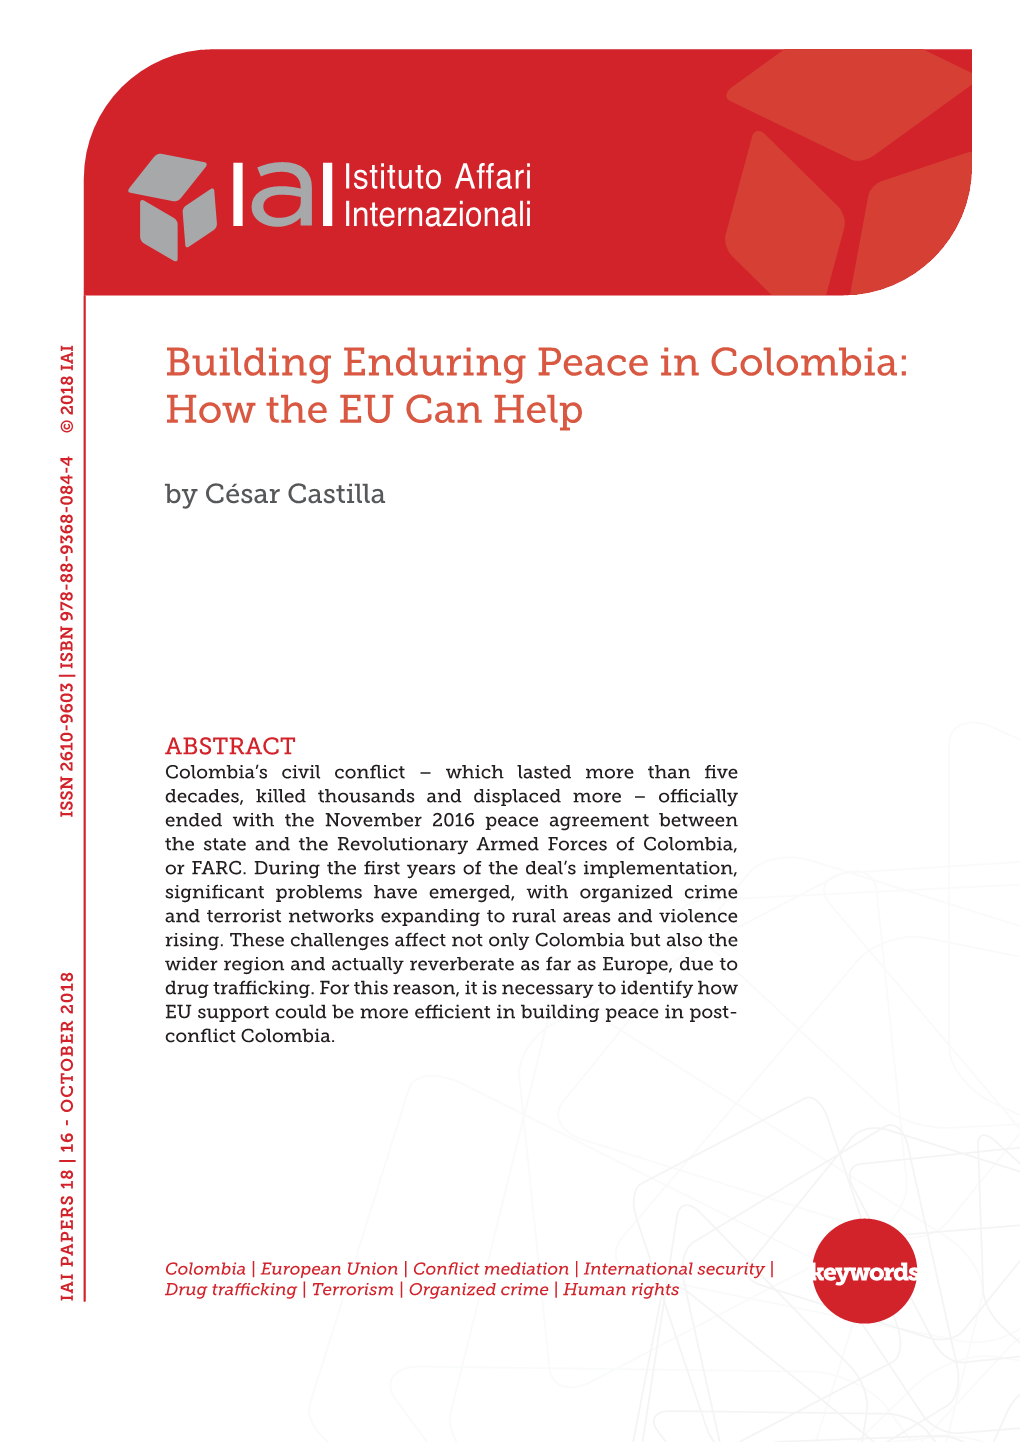 Building Enduring Peace in Colombia: How the EU Can Help